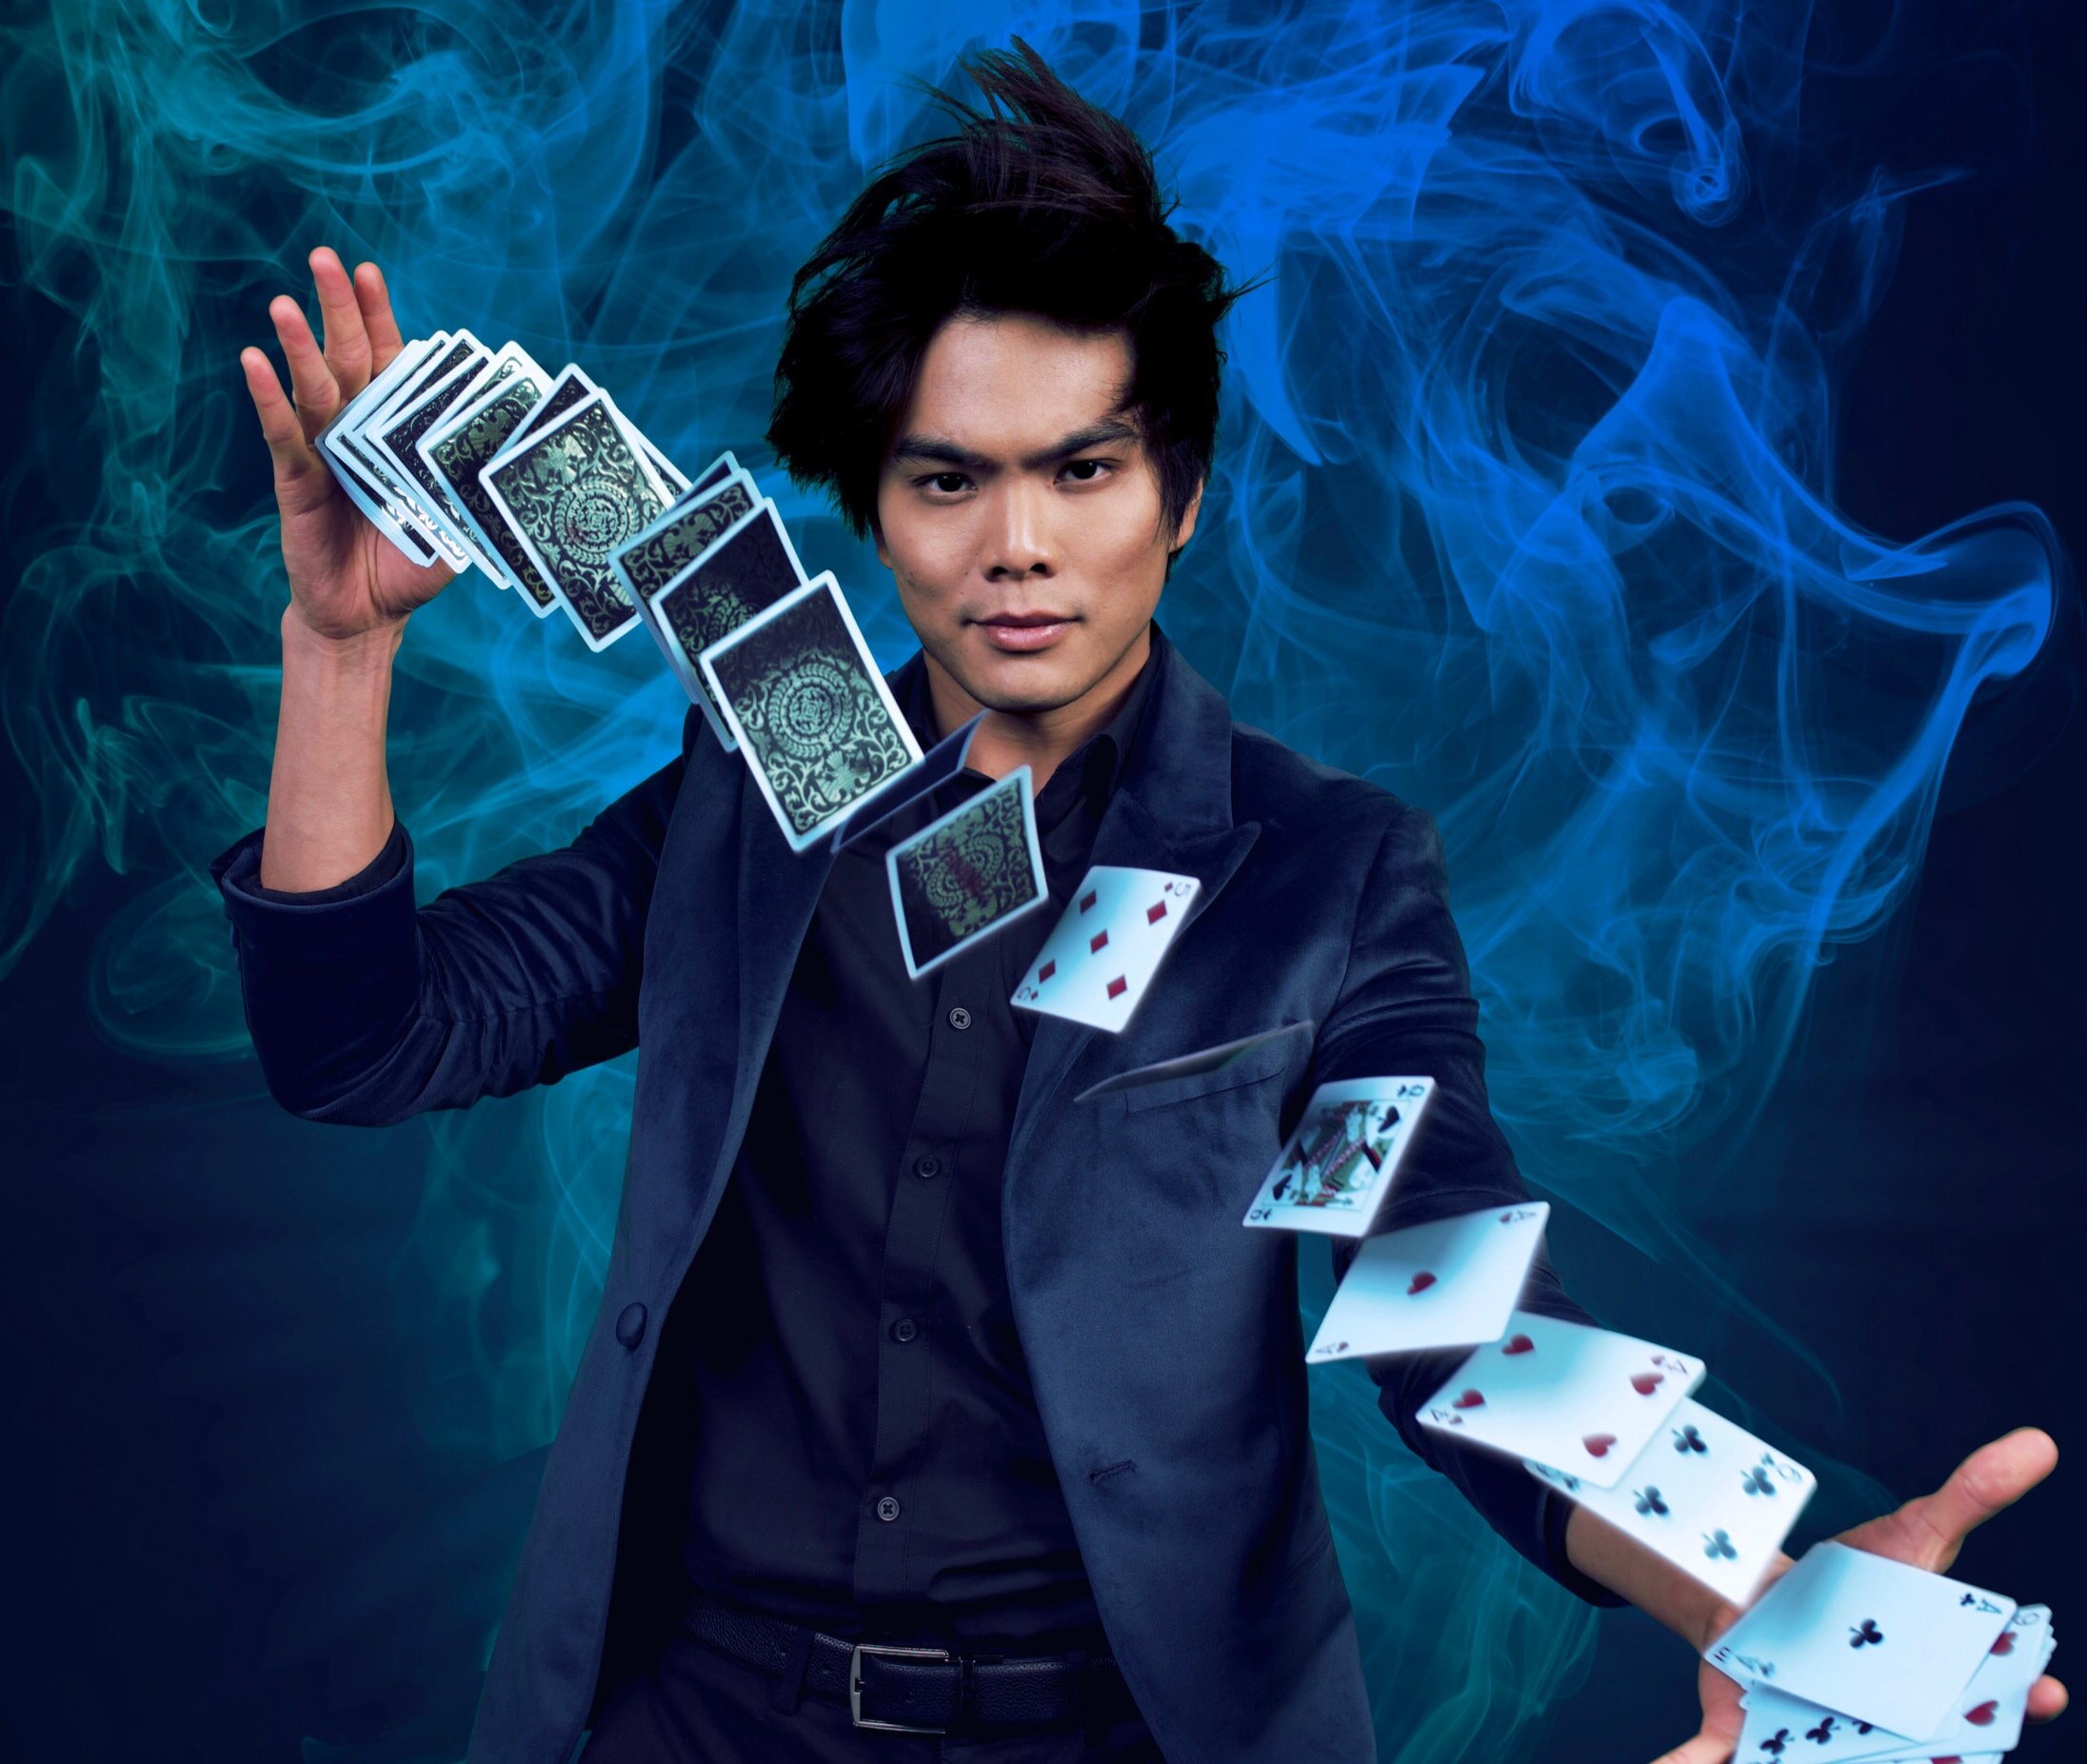 Shin Lim Magic Welcome To The Art Of Illusion